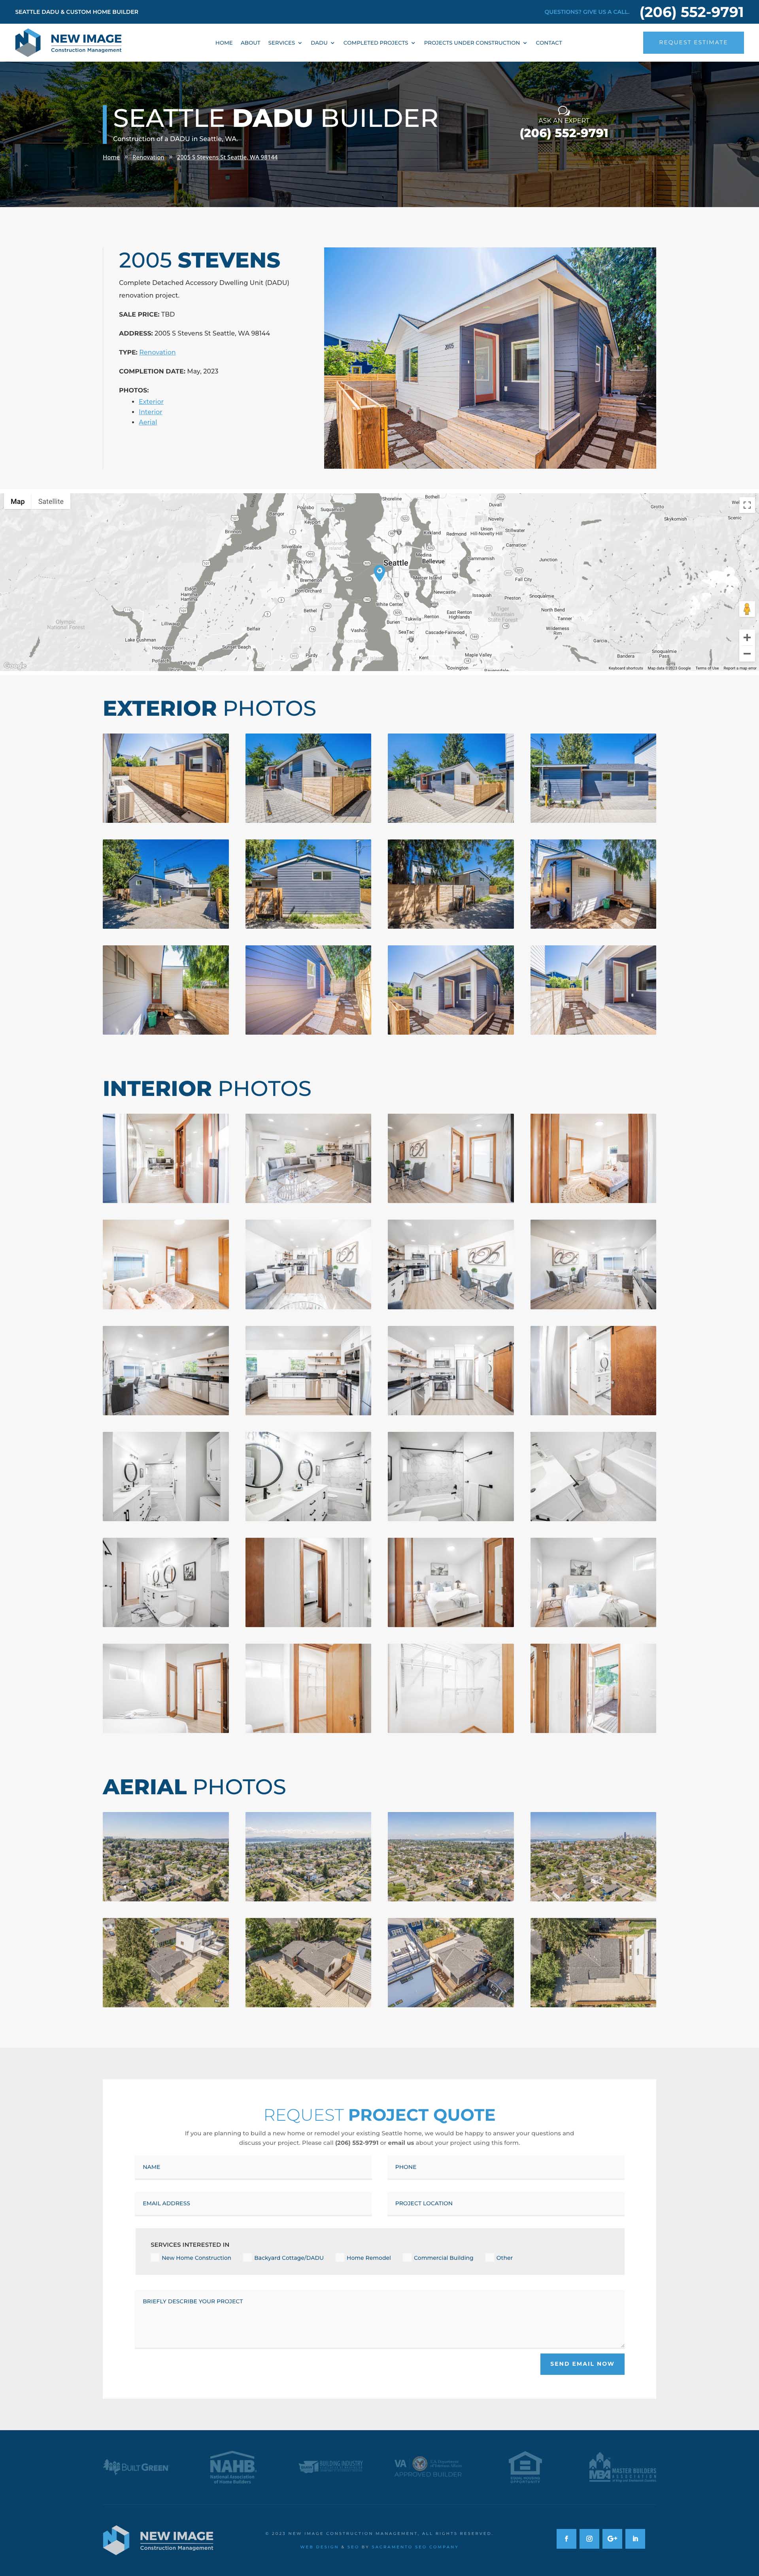 New Image Construction - Project Page